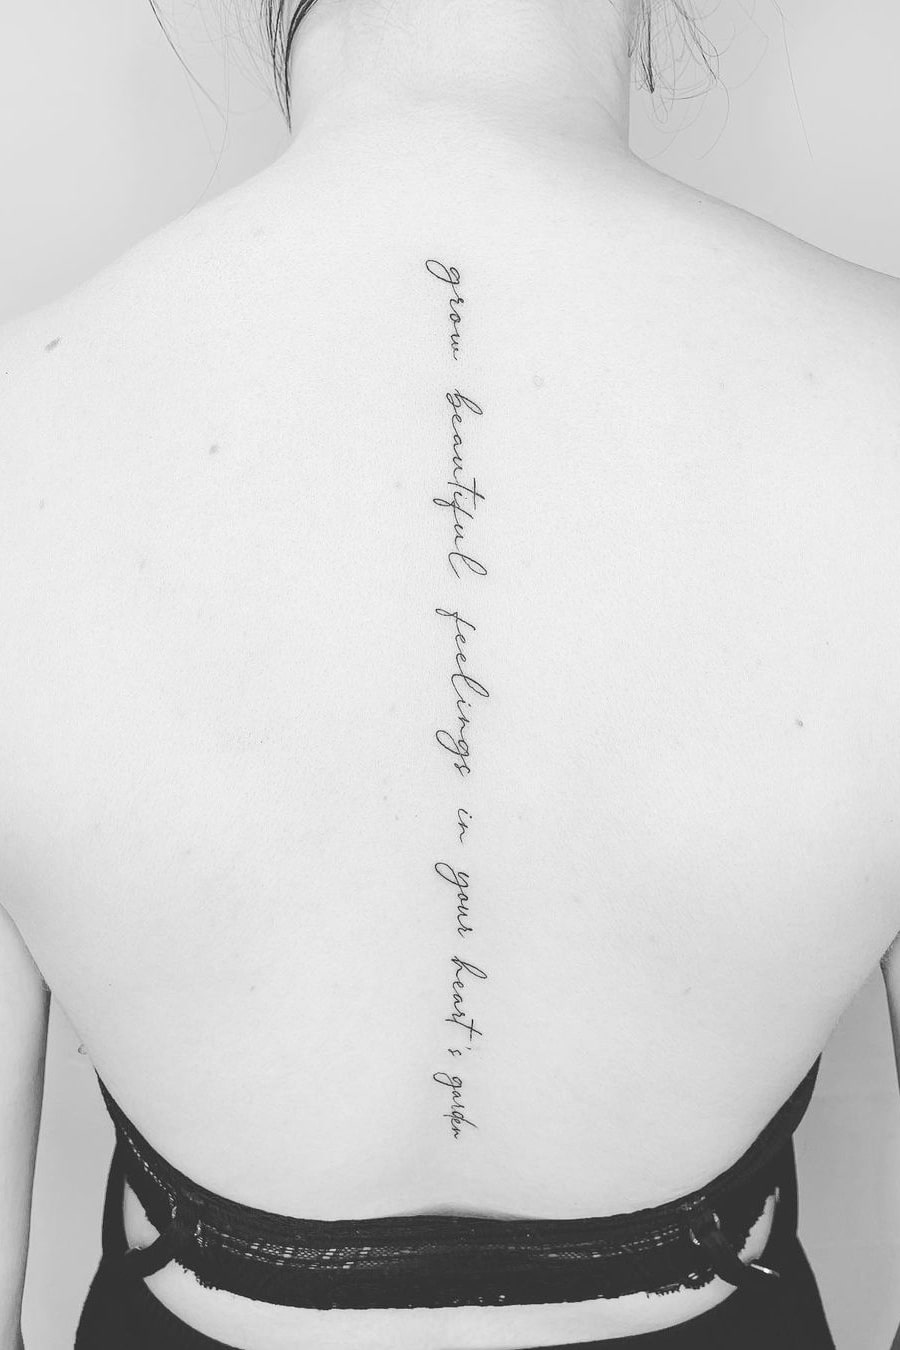 Quote back tattoo